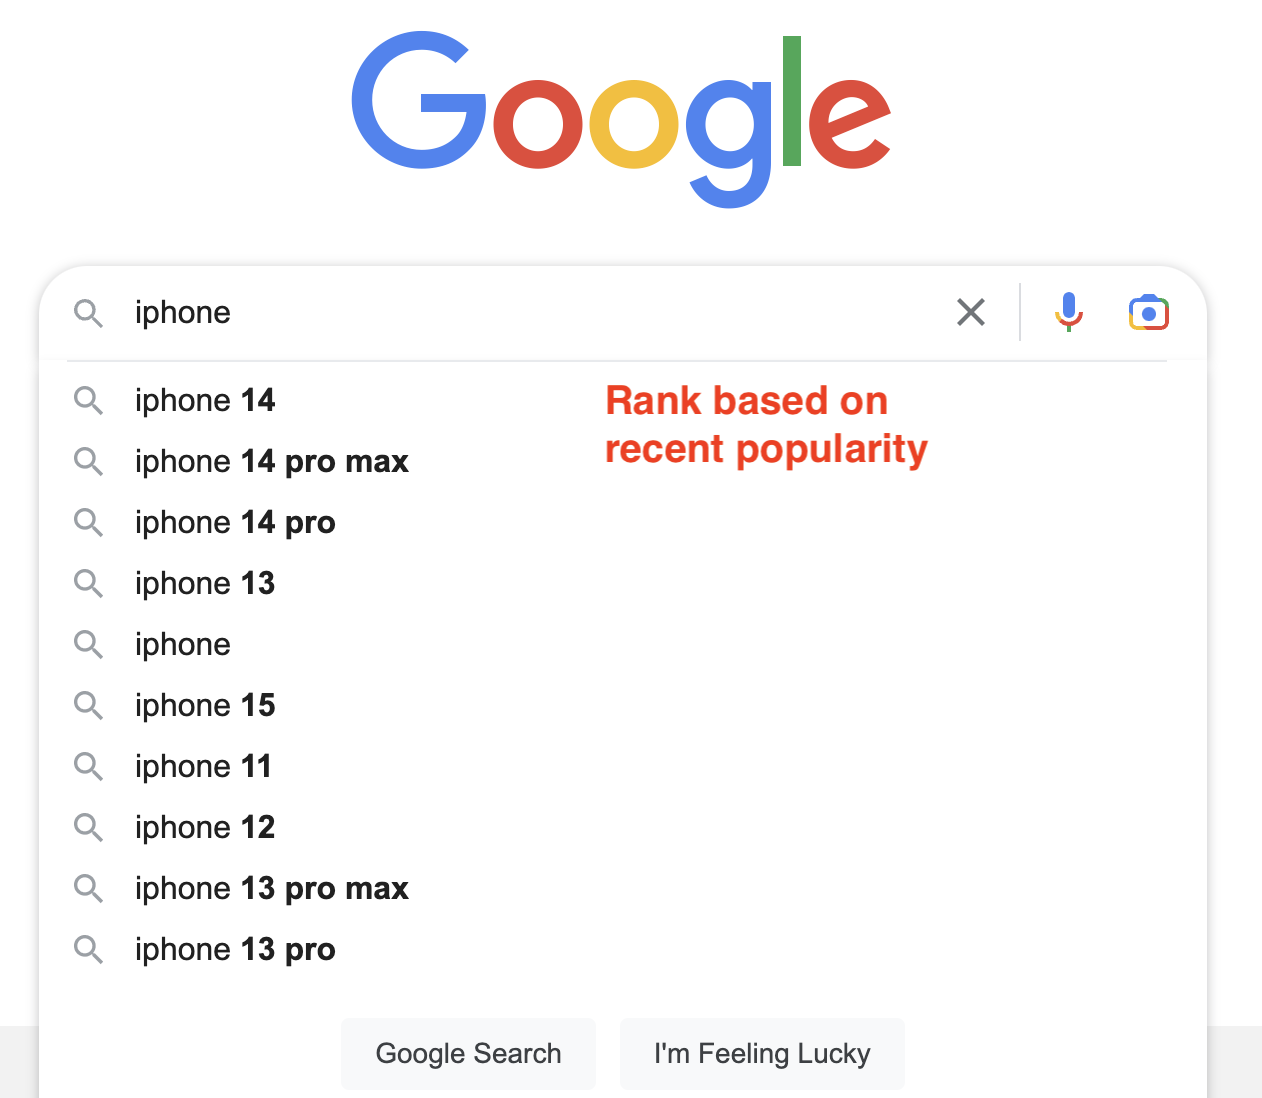 Google Autocomplete also ranks based on recent popularity of trending keywords